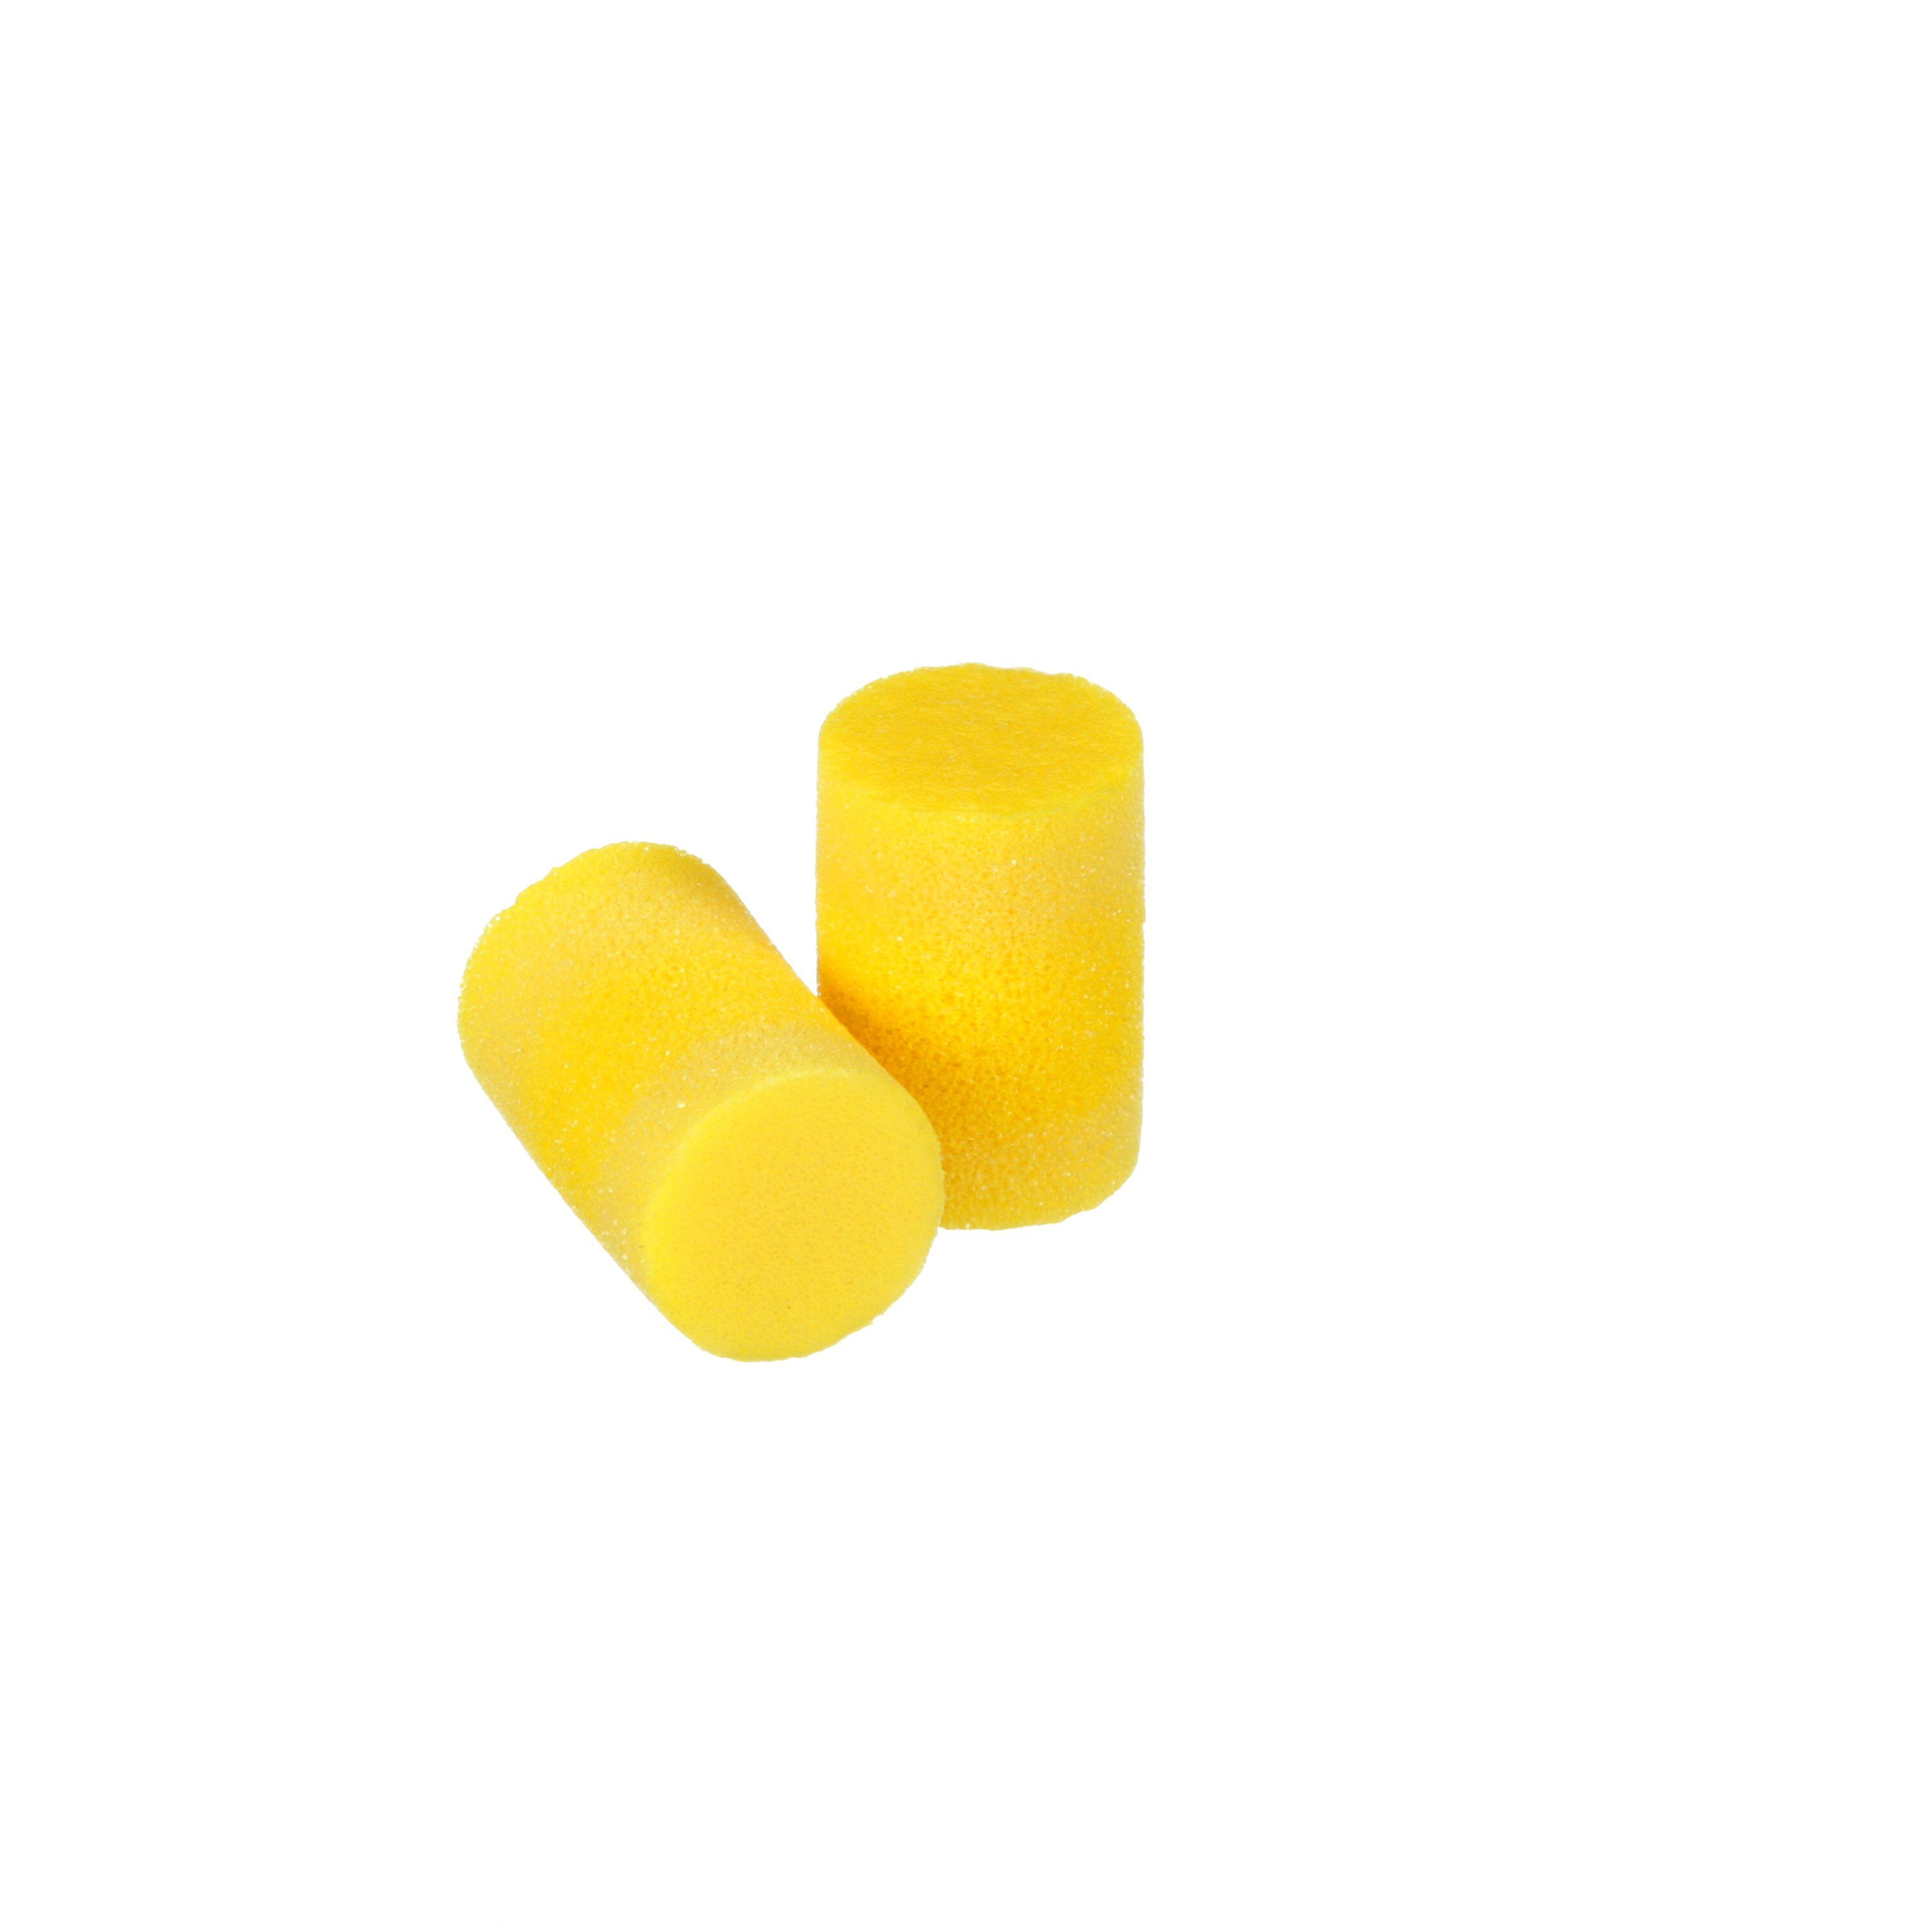 3M E-A-RSOFT GRIPPERS EAR PLUGS CORDED 100 PAIR INDIVIDUALLY PACKED PAIRS LARGE 